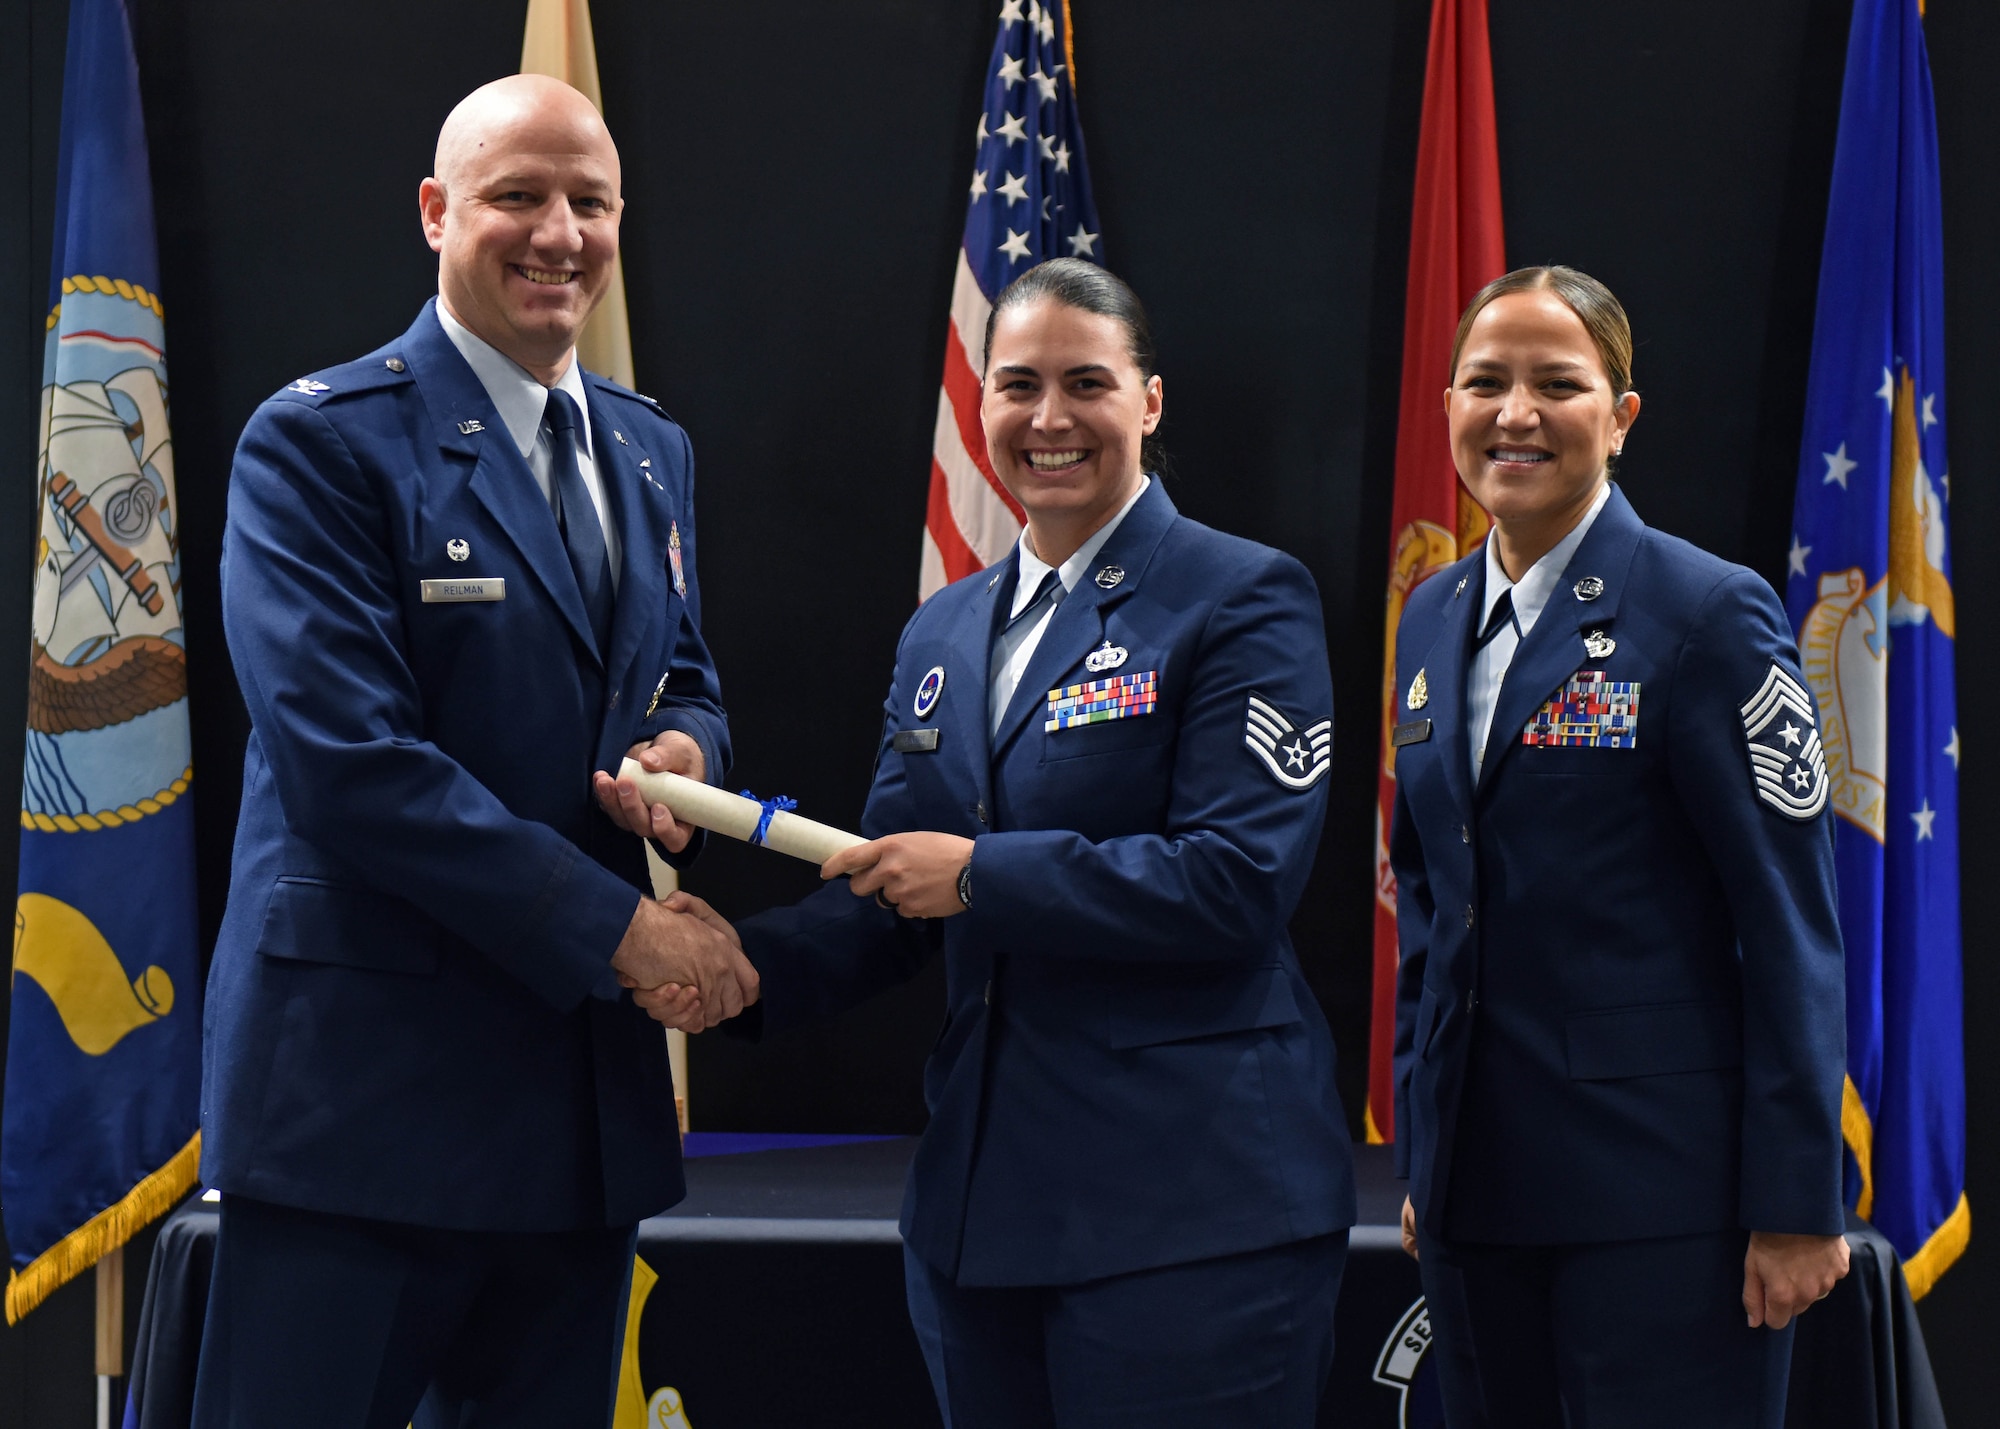 U.S. Air Force Col. Matthew Reilman, 17th Training Wing commander, presents Staff Sgt. Patricia Denman, 315th Training Squadron instructor, with a diploma from the Community College of the Air Force at the CCAF graduation in the Powell Event Center, Goodfellow Air Force Base, Texas, Nov. 16, 2022. The 54 graduates gained their associate degree through hard work and dedication. (U.S. Air Force photo by Airman 1st Class Sarah Williams)